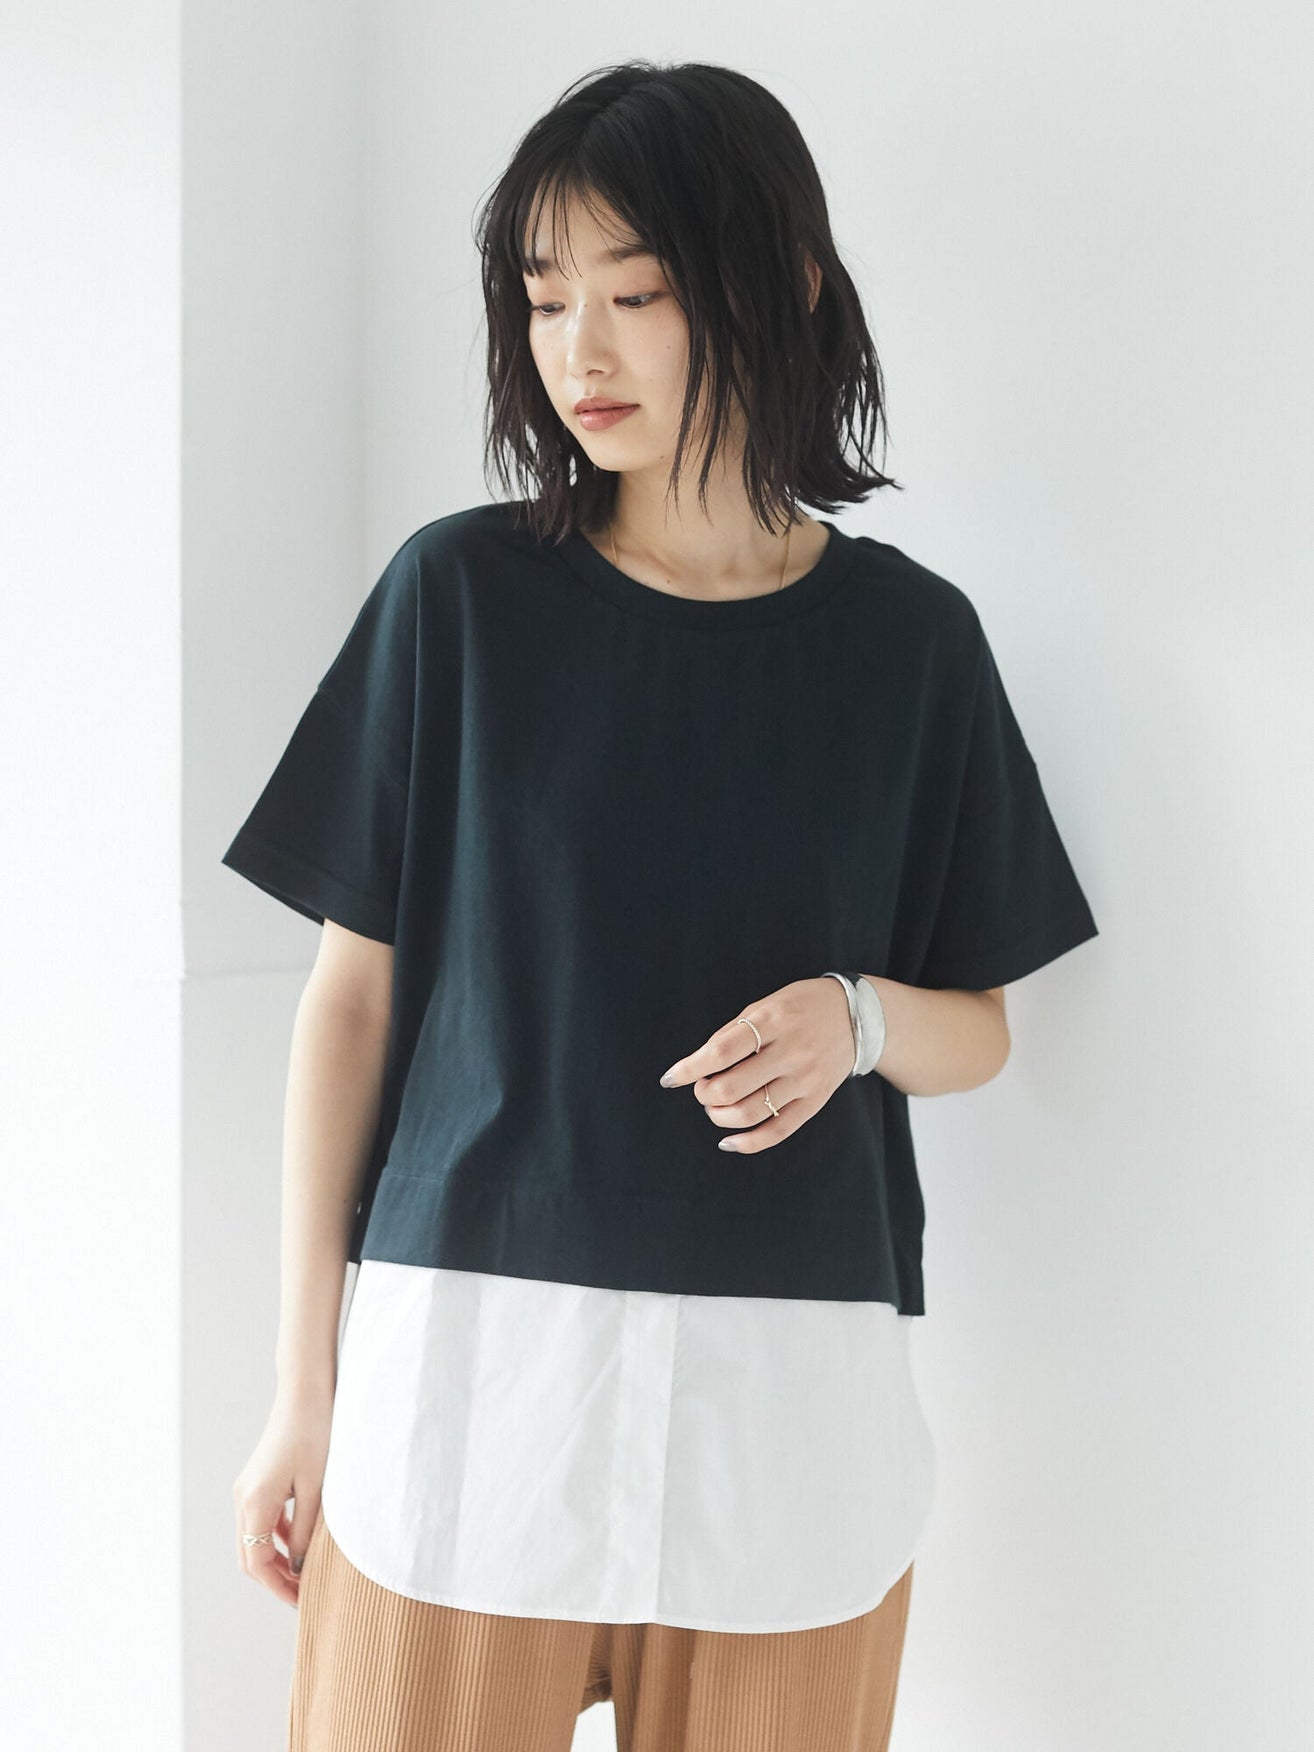 Giselle Duo Color T-Shirt